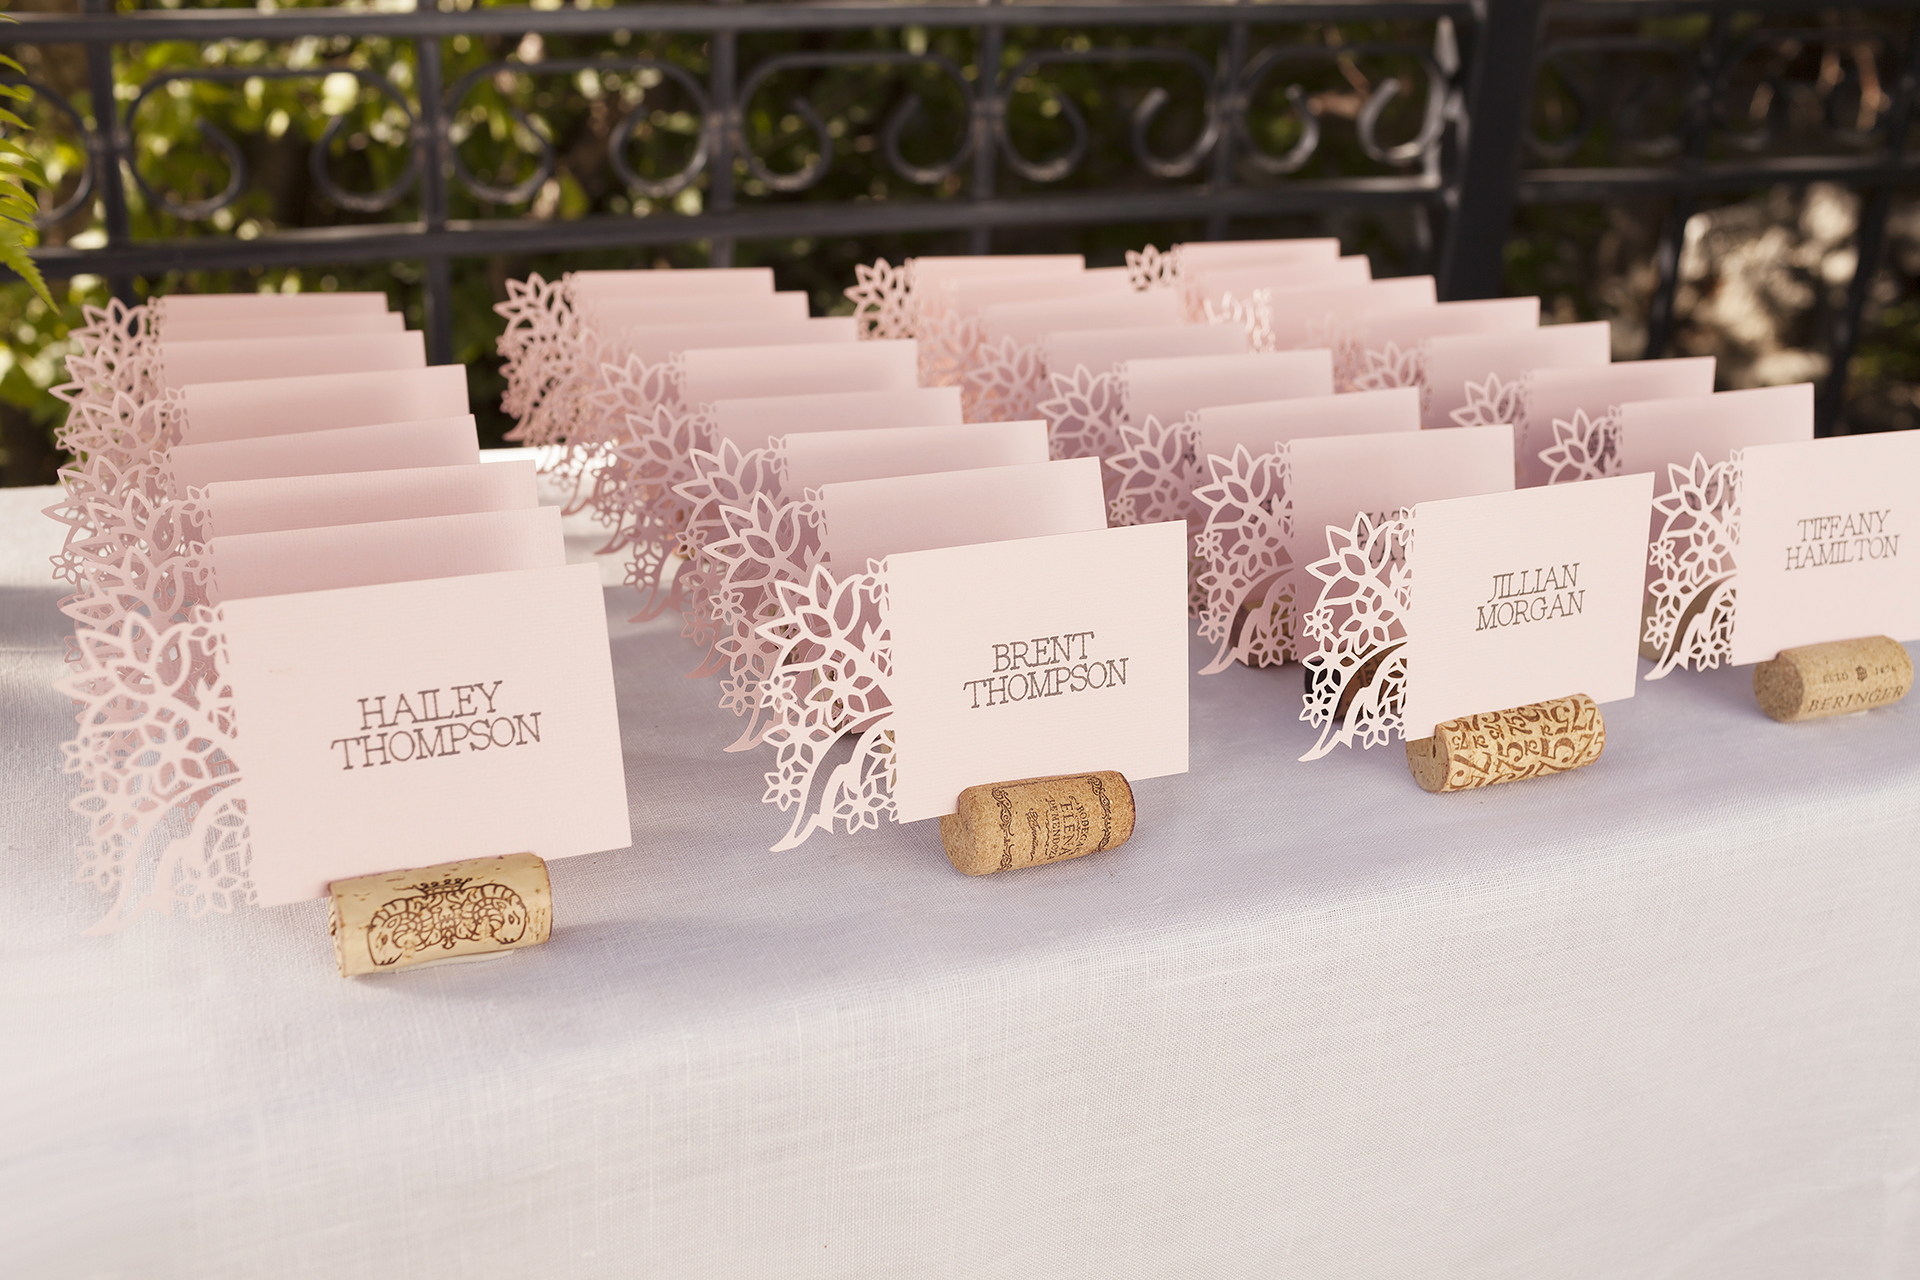 Name cards with a floral cutout on one side in rows on a table